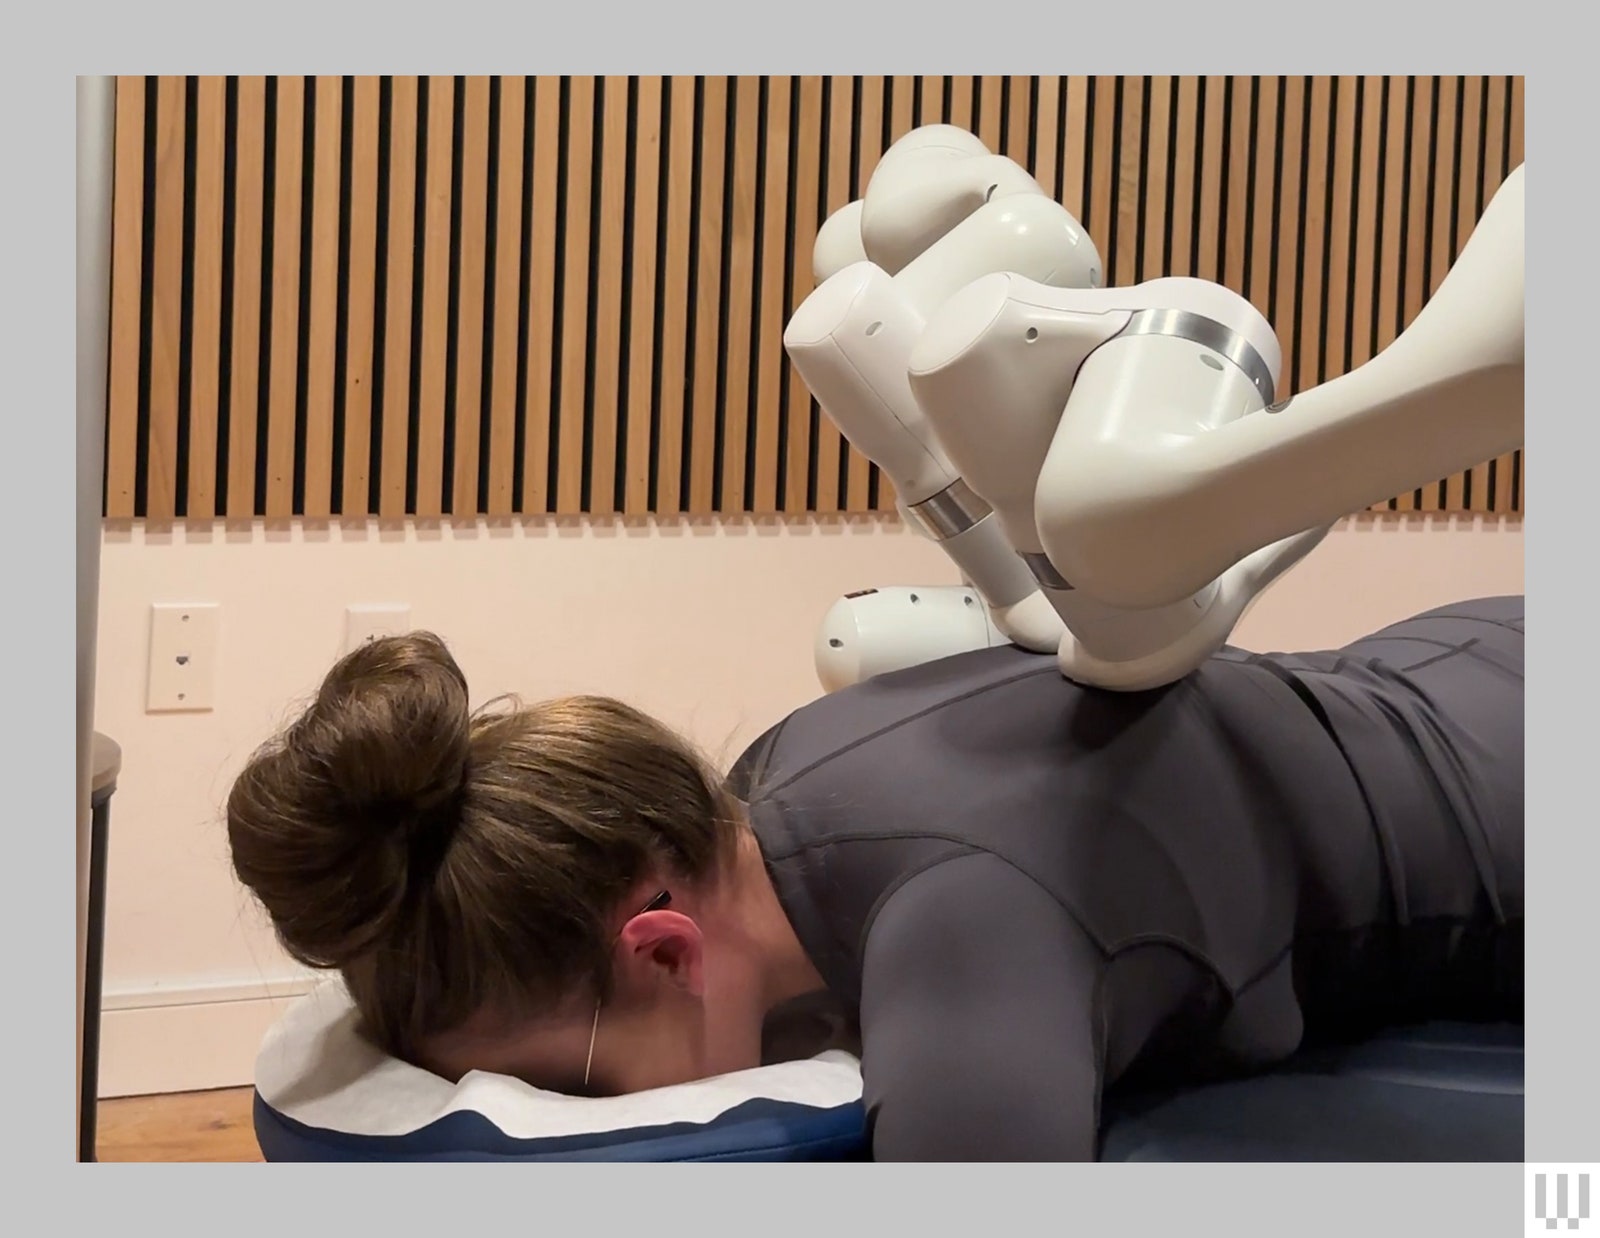 Person laying facedown on a massage table hair in a bun with a robotic arm conducting a massage on their upper back